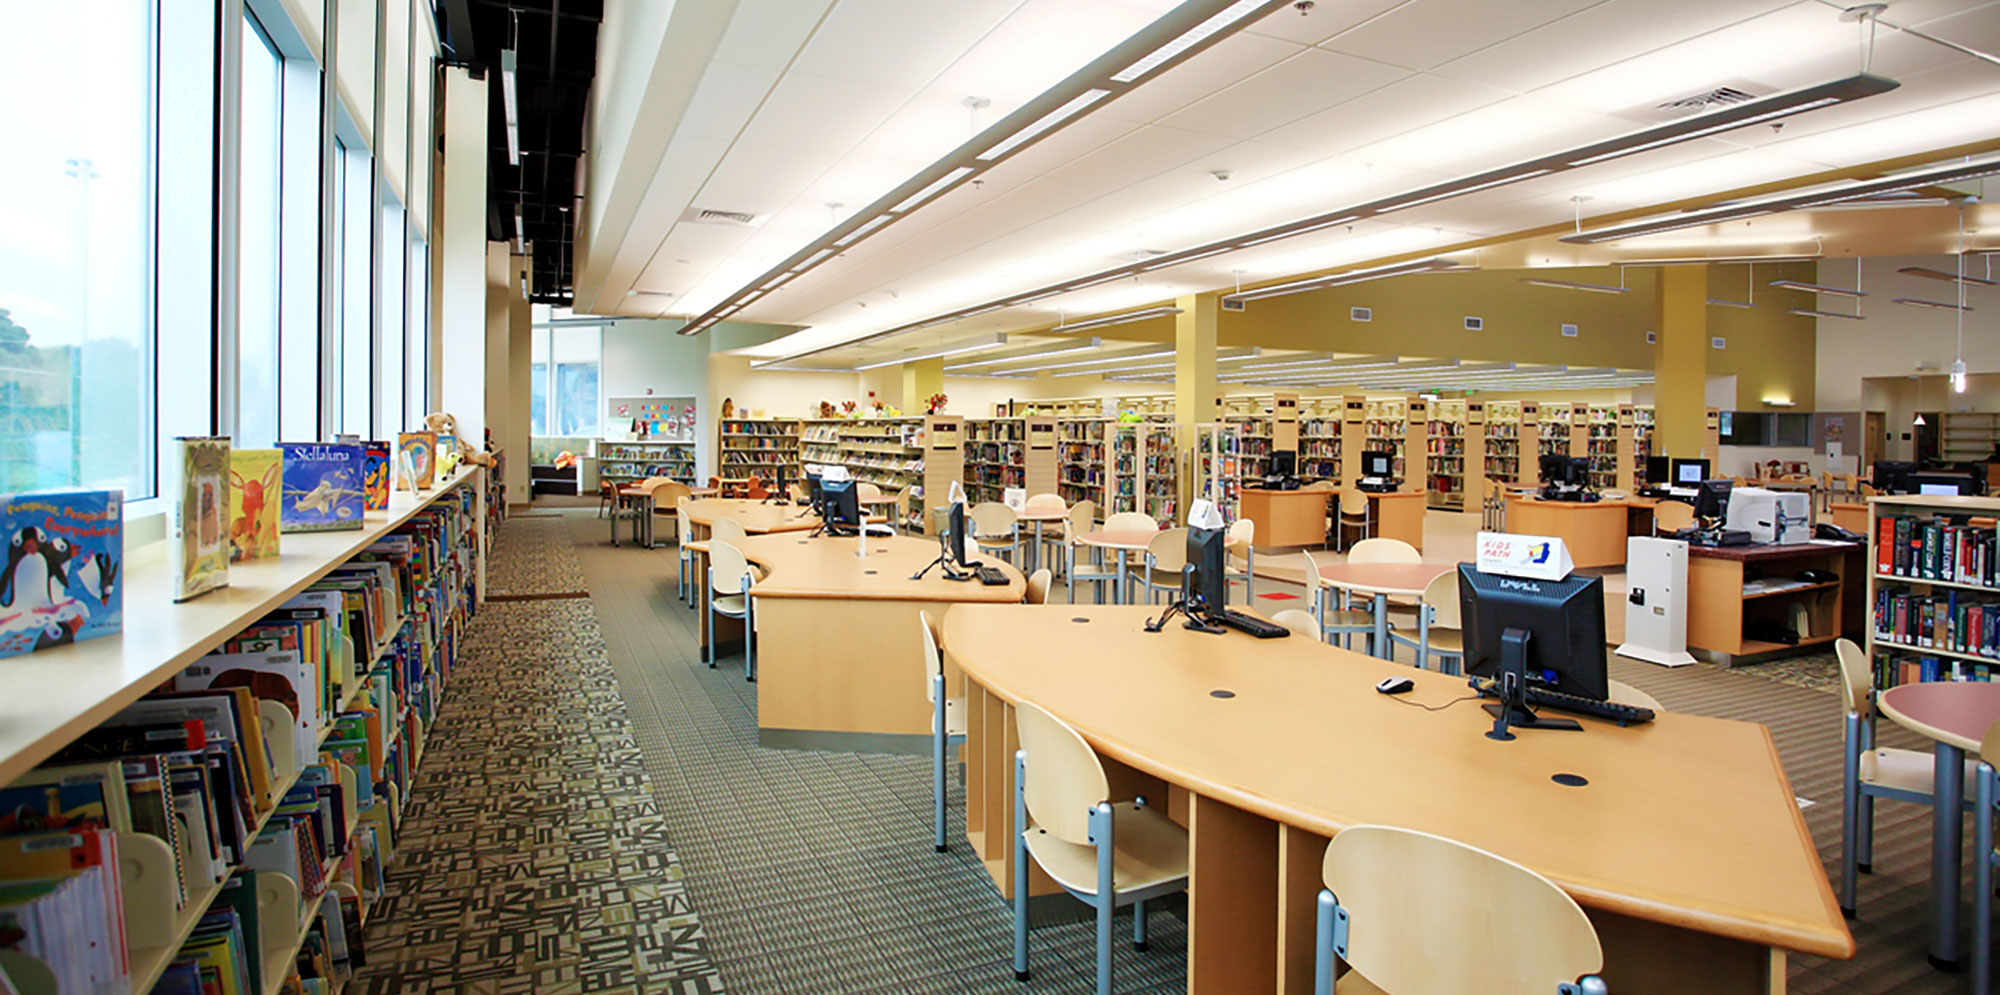 Exposition Library interior